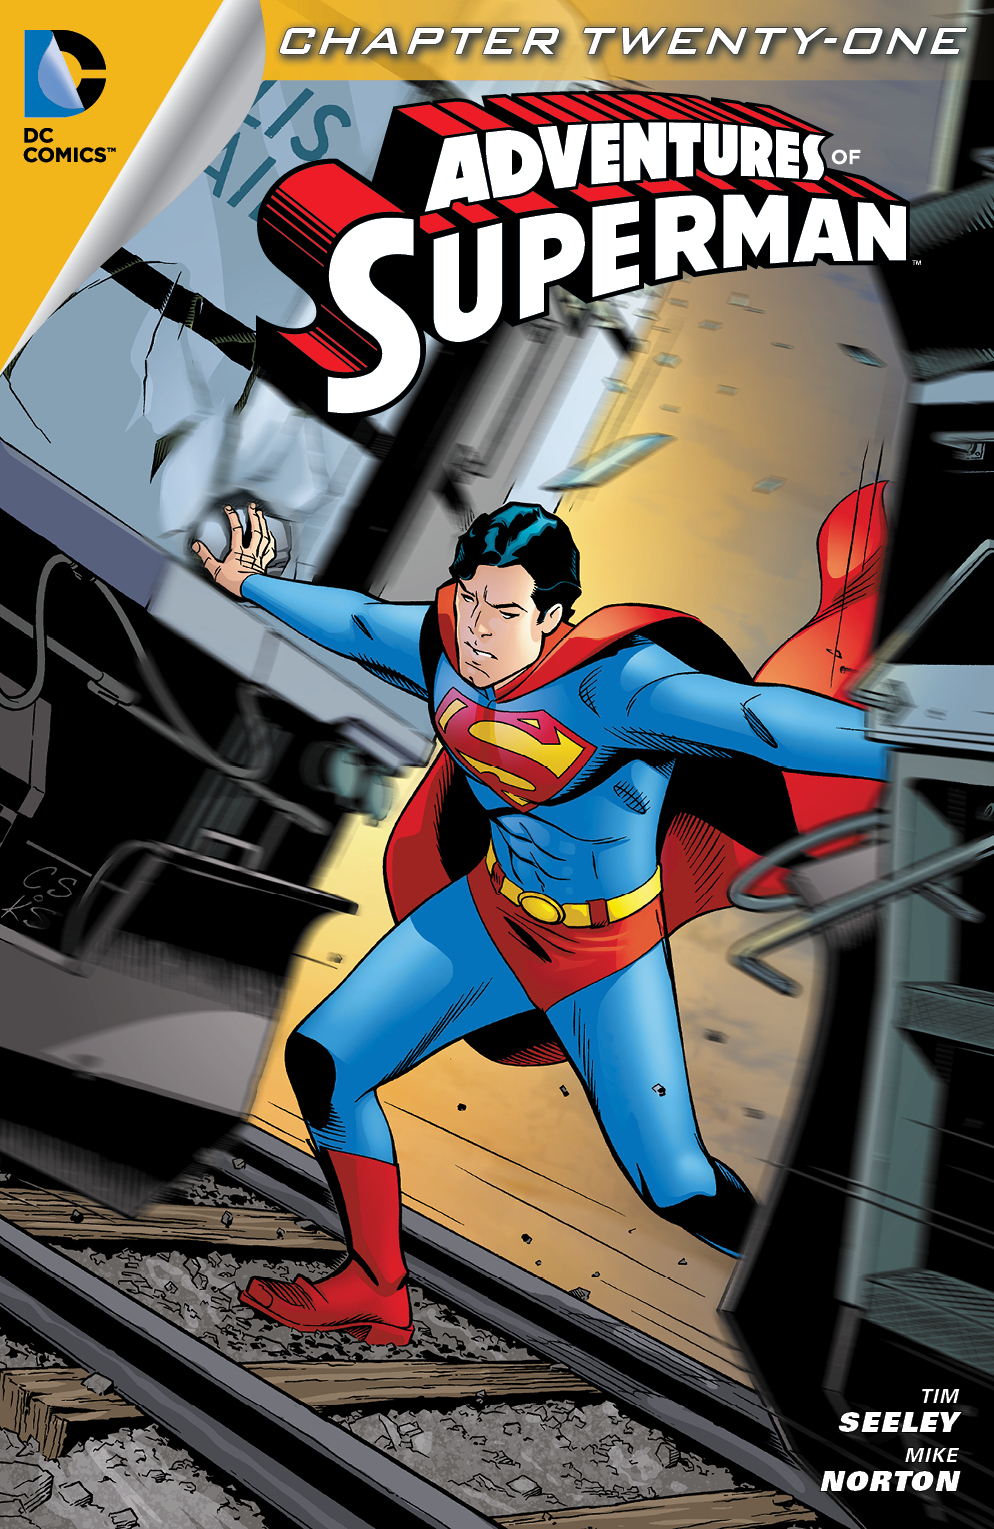 Adventures of Superman (2013-) #21 preview images